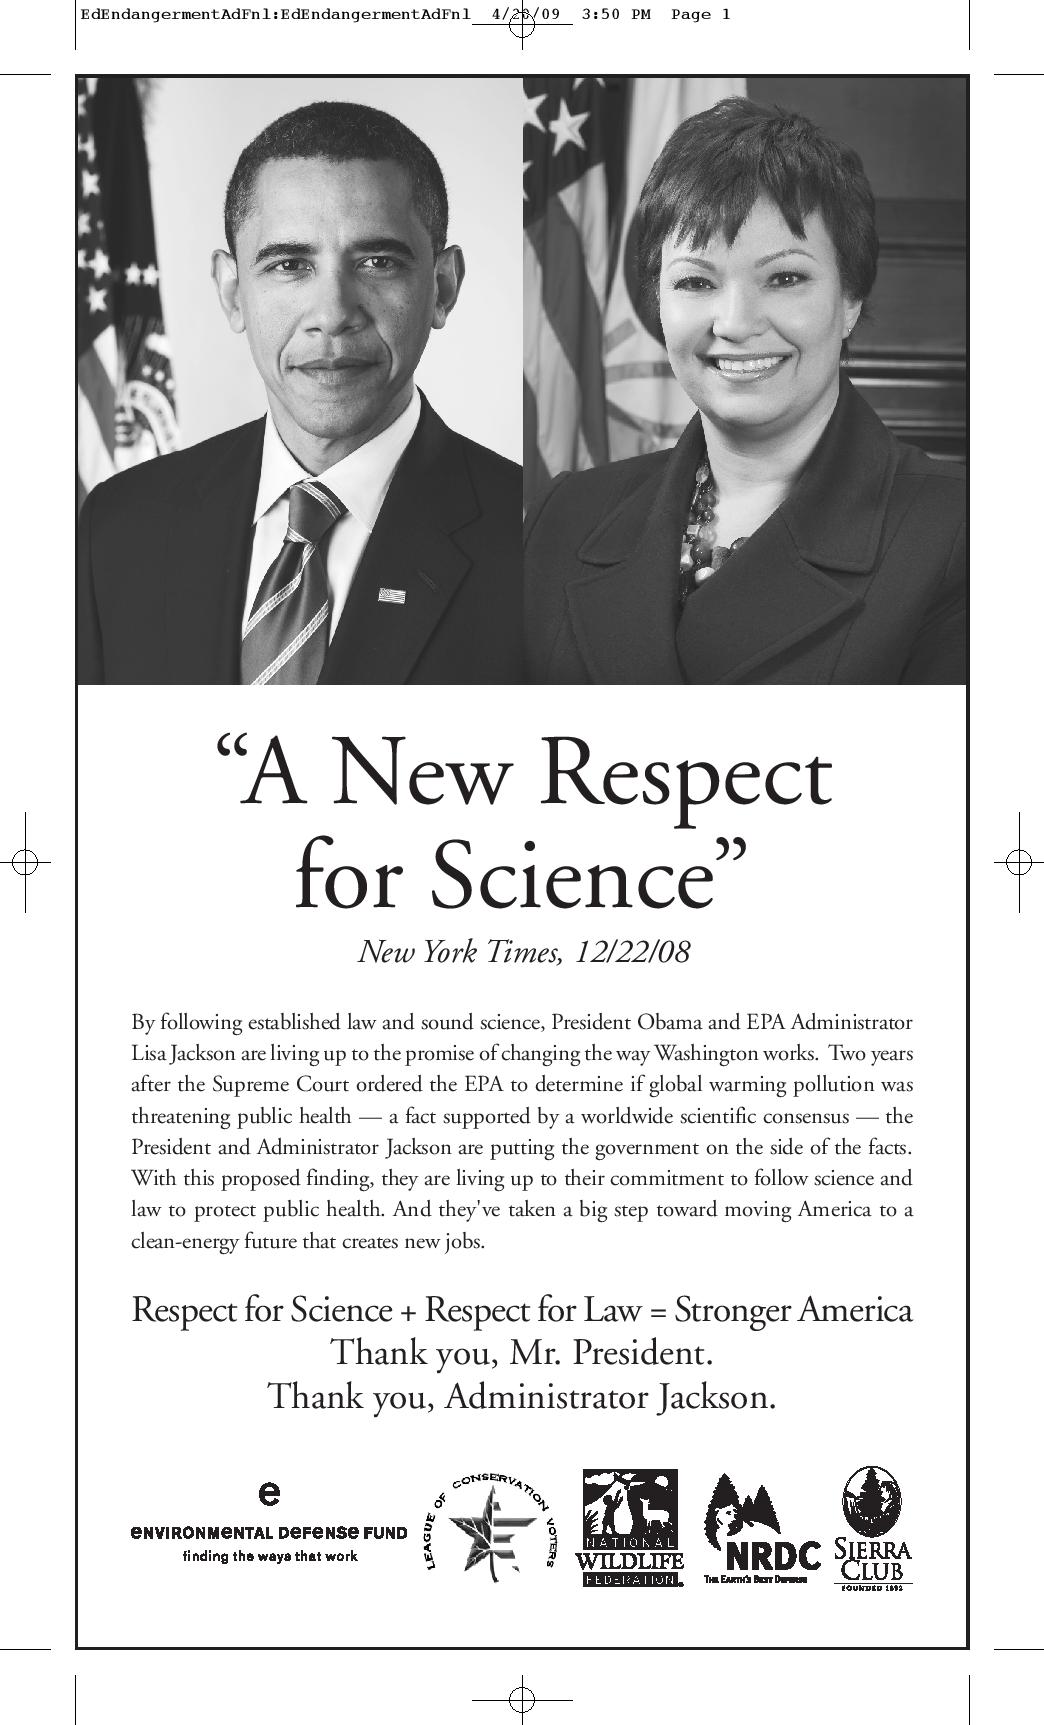 Respect for Science + Respect for Law = Stronger America